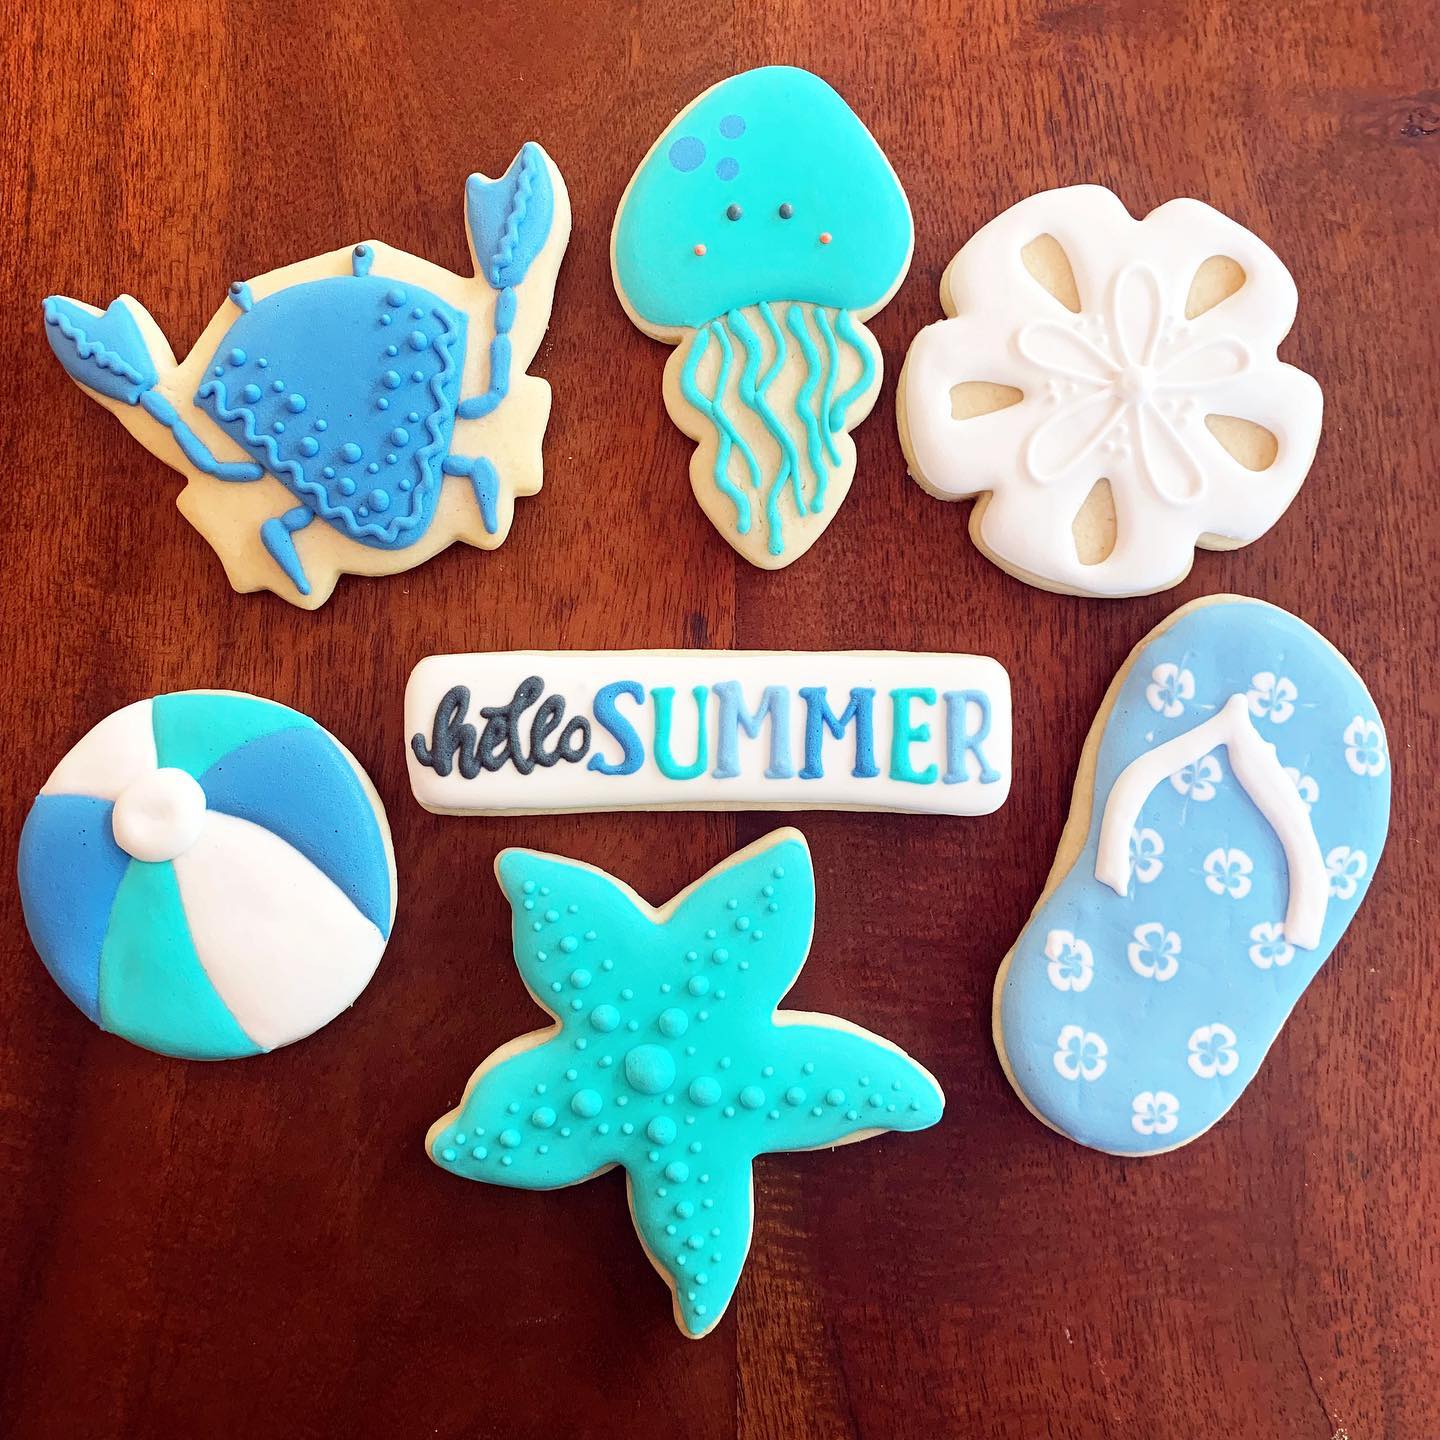 7 cookies cut into the shapes of a beach ball, flip flop, shells and other summer icons